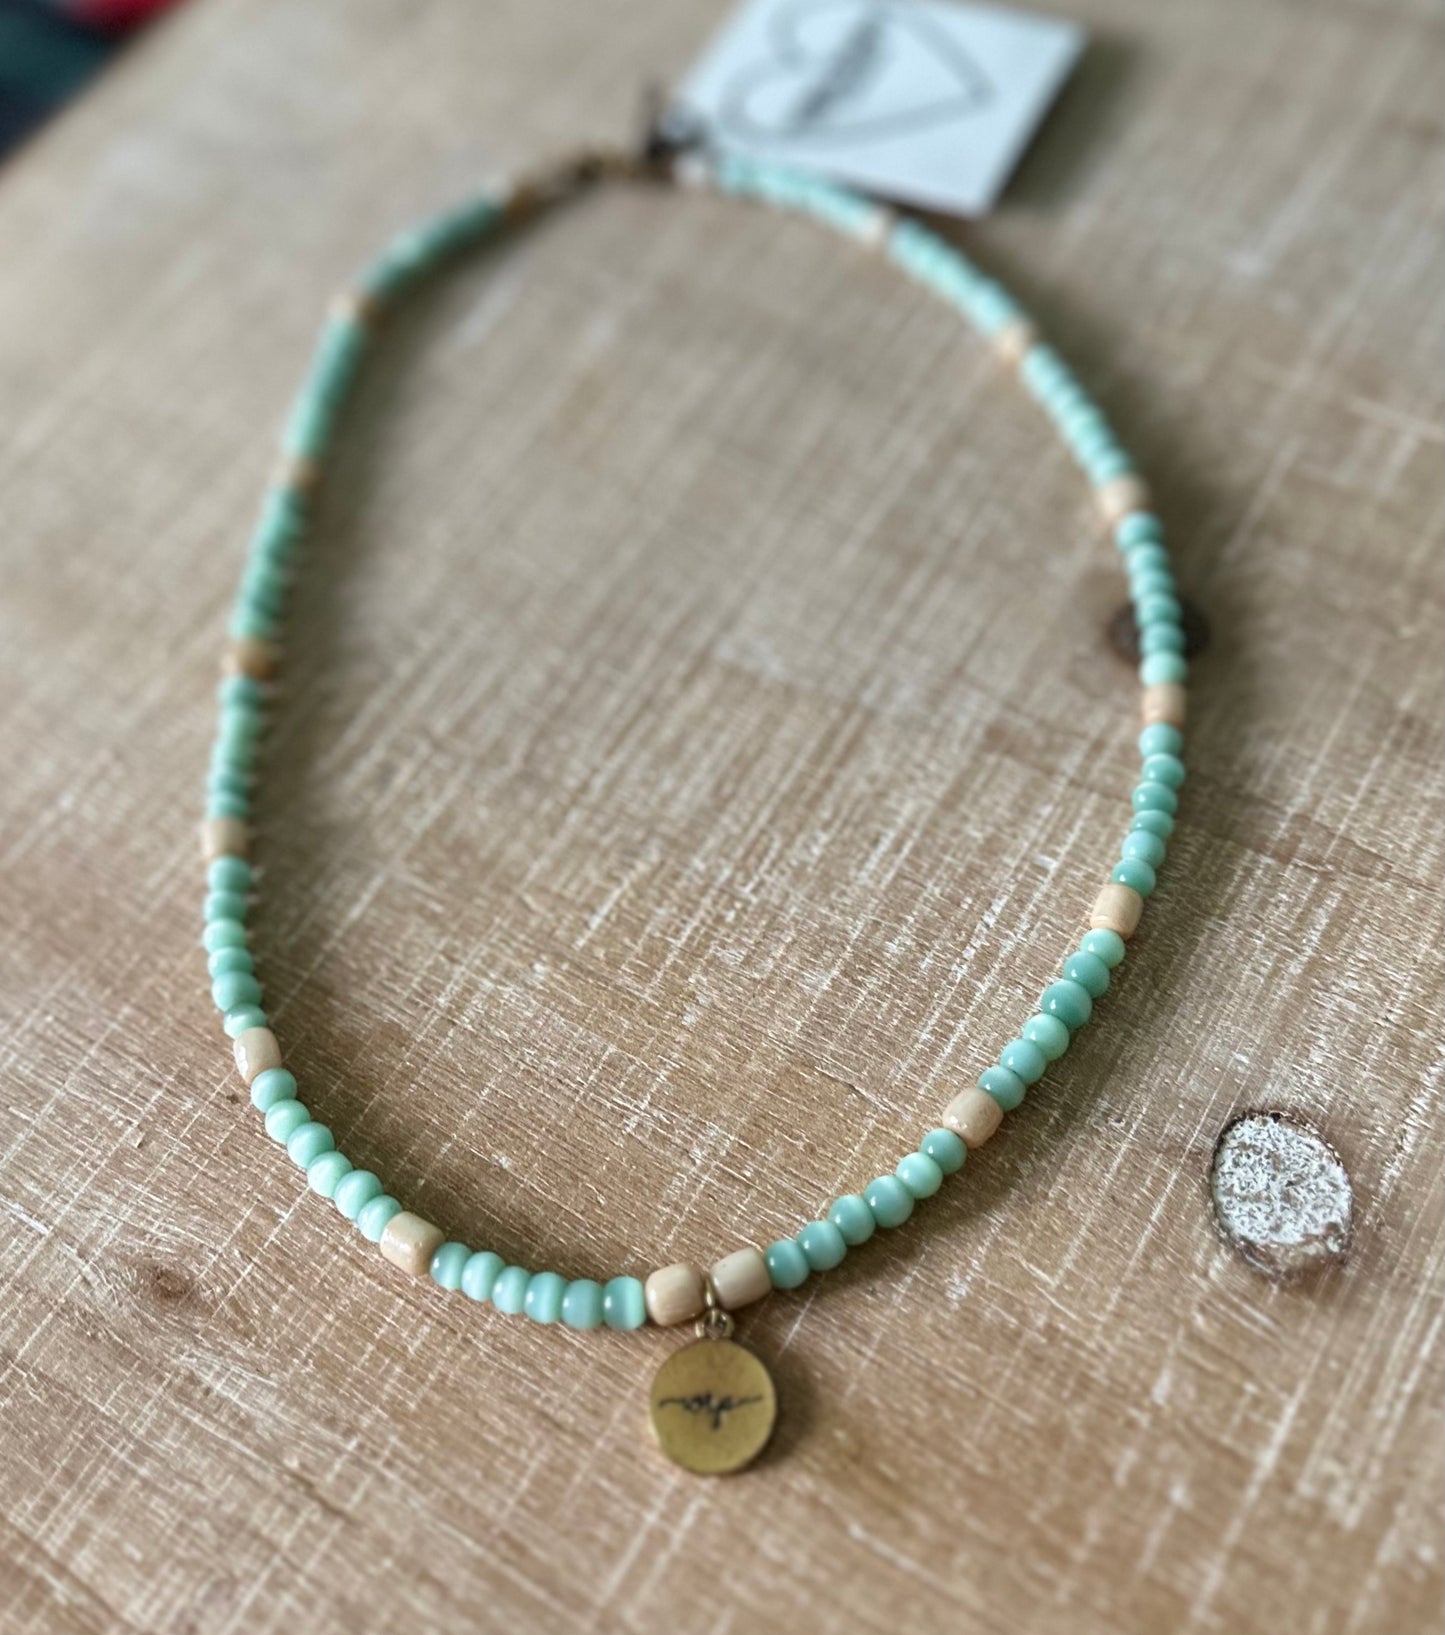 Sandy Tides and Blue Skies Necklace